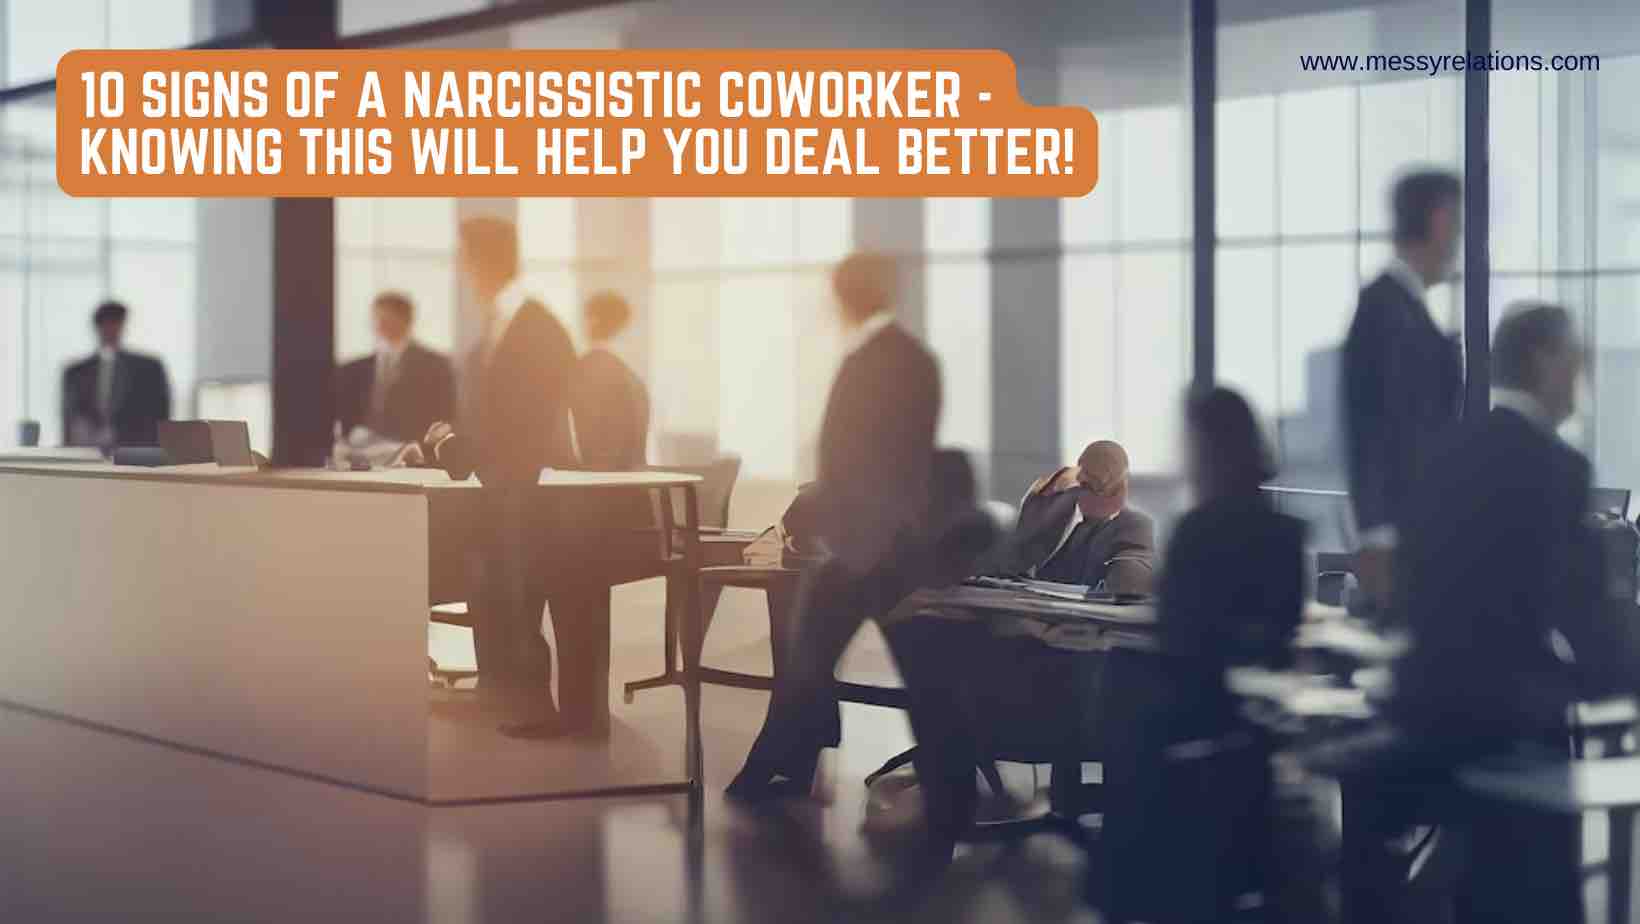 Signs of a Narcissistic Coworker